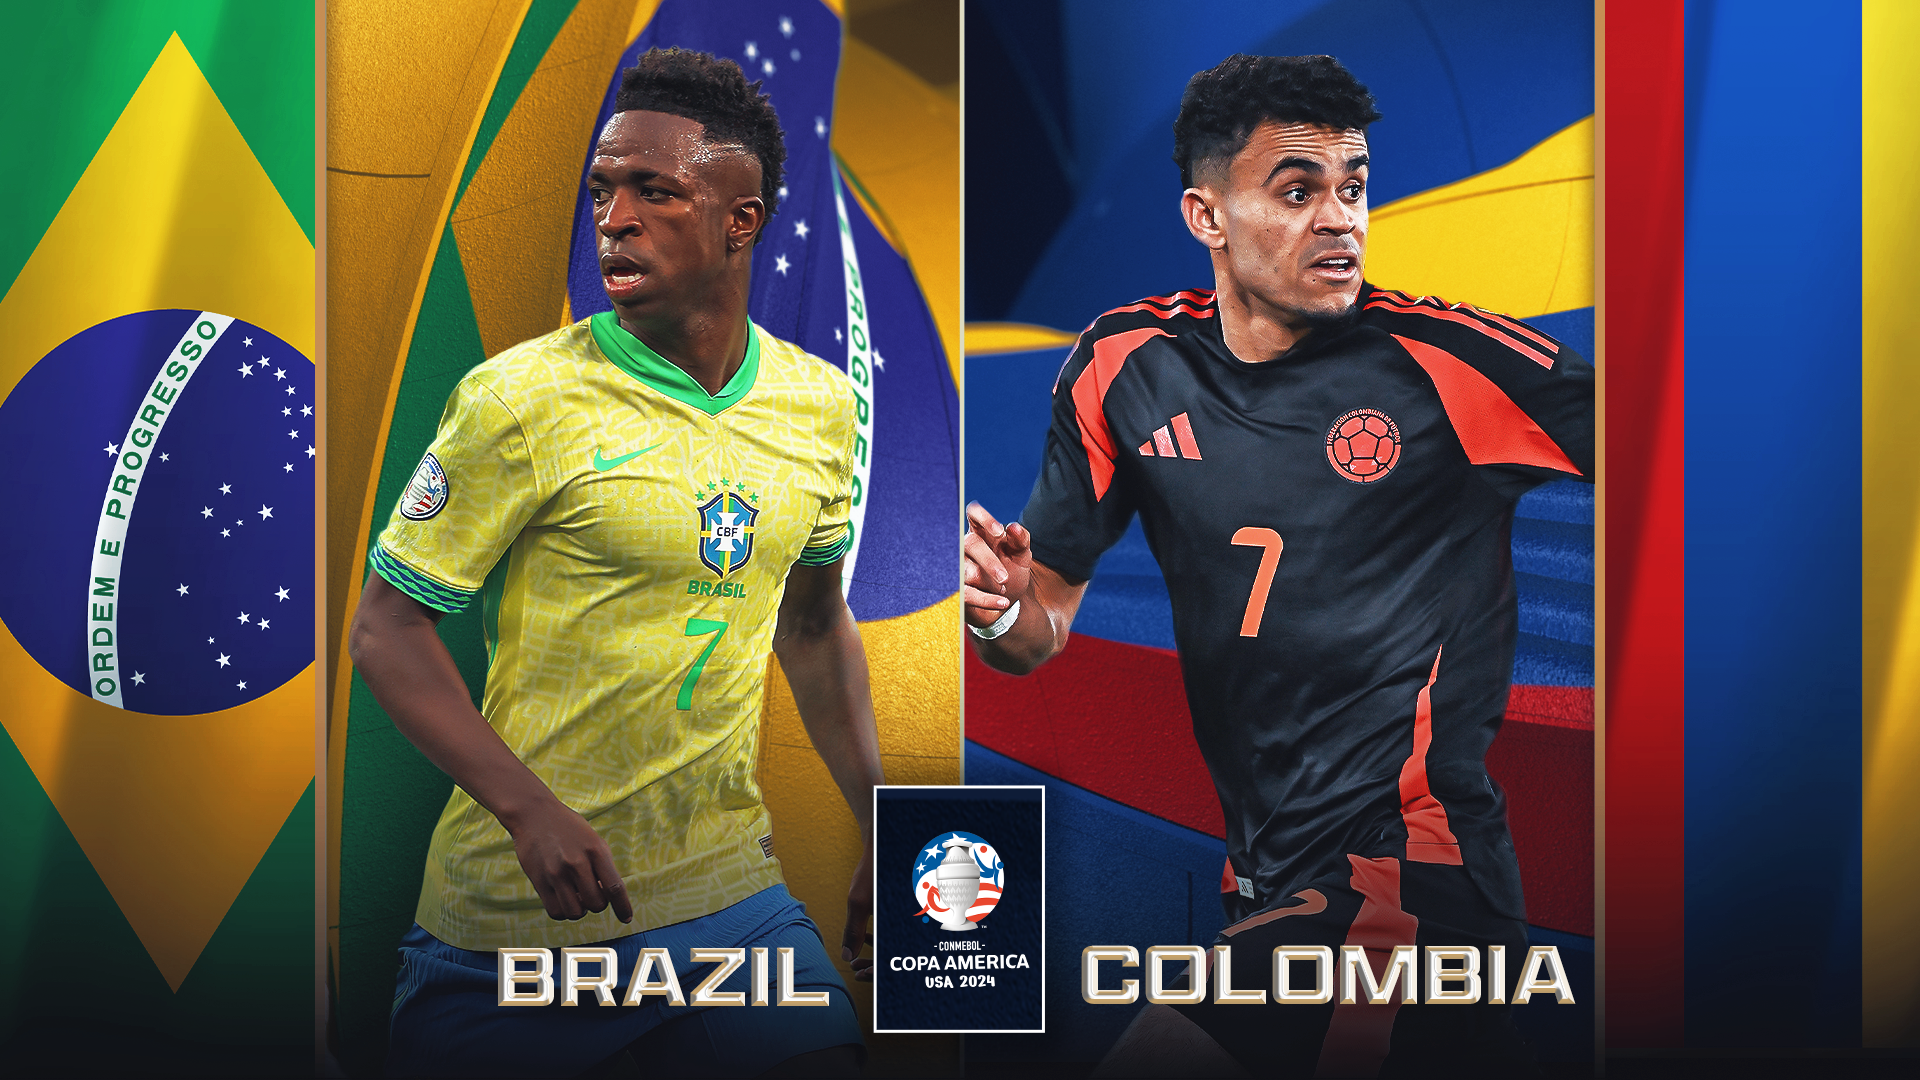 Brazil vs. Colombia highlights: Colombia wins Group D after 1-1 draw with Brazil